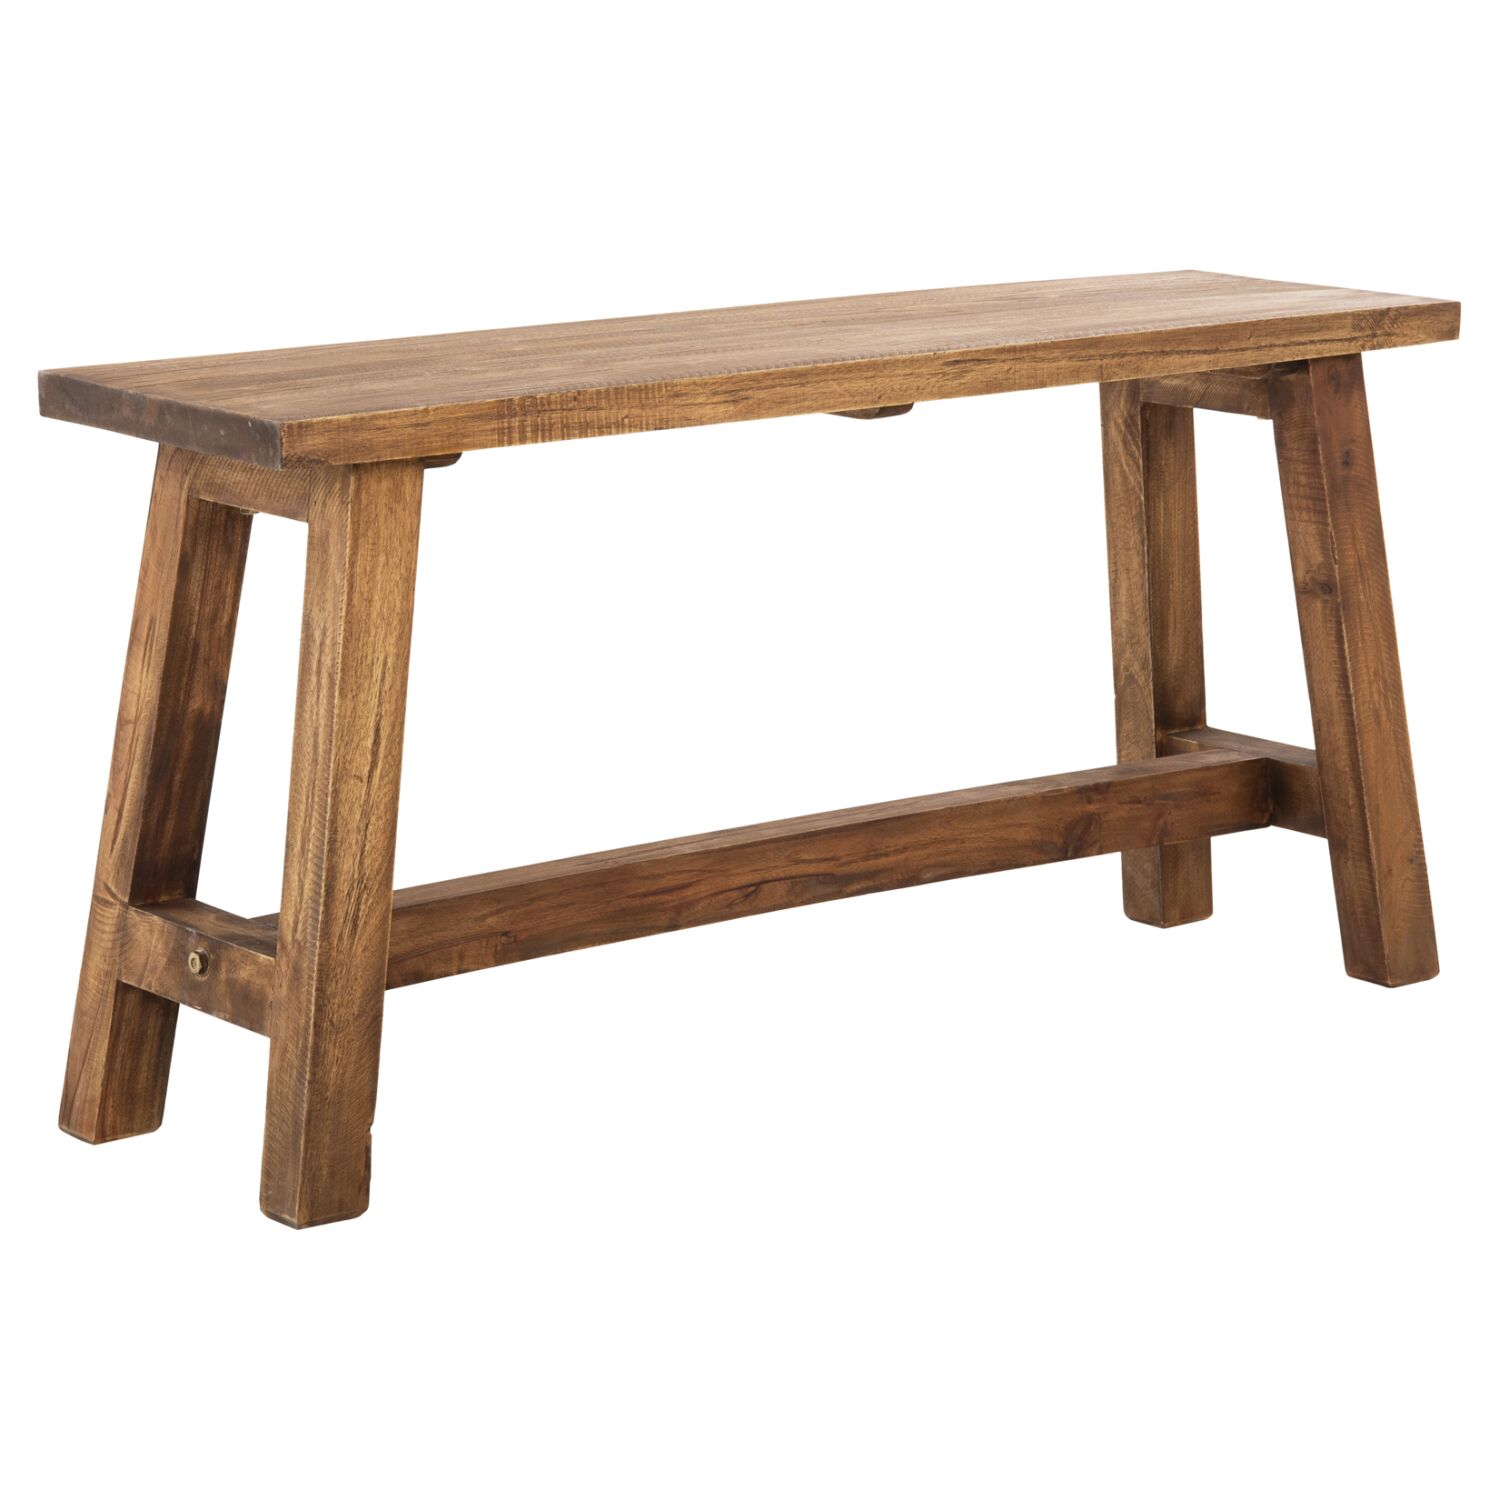 SIDE TABLE RANCH HM9752 MAHOGANY WOOD IN NATURAL COLOR 90x25x45Hcm.